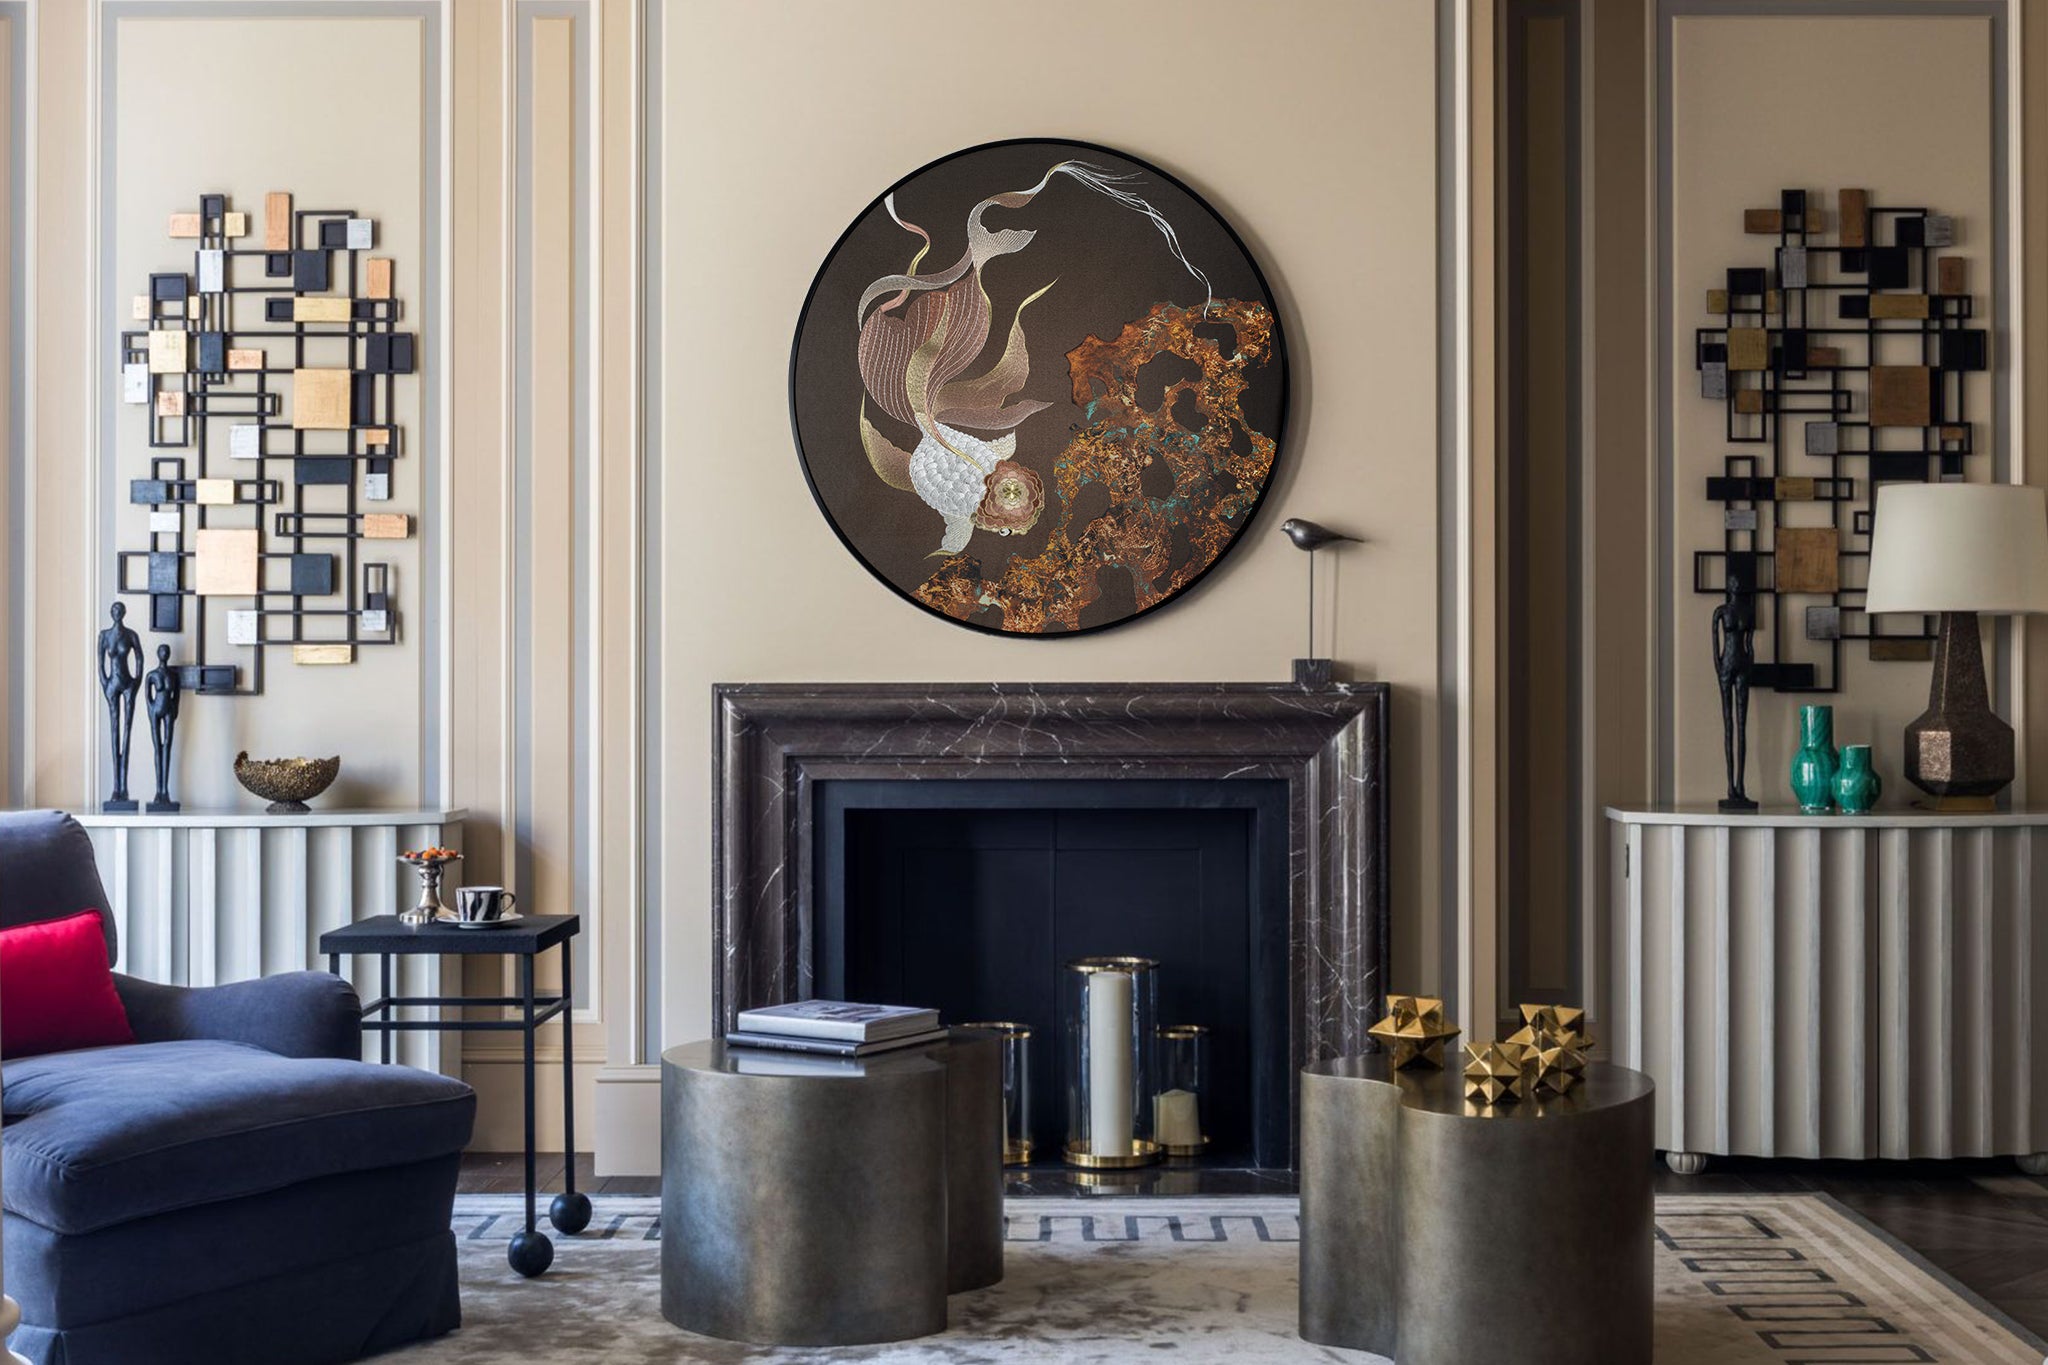 An artwork embroidered with koi fish hangs above the fireplace in the modern living room